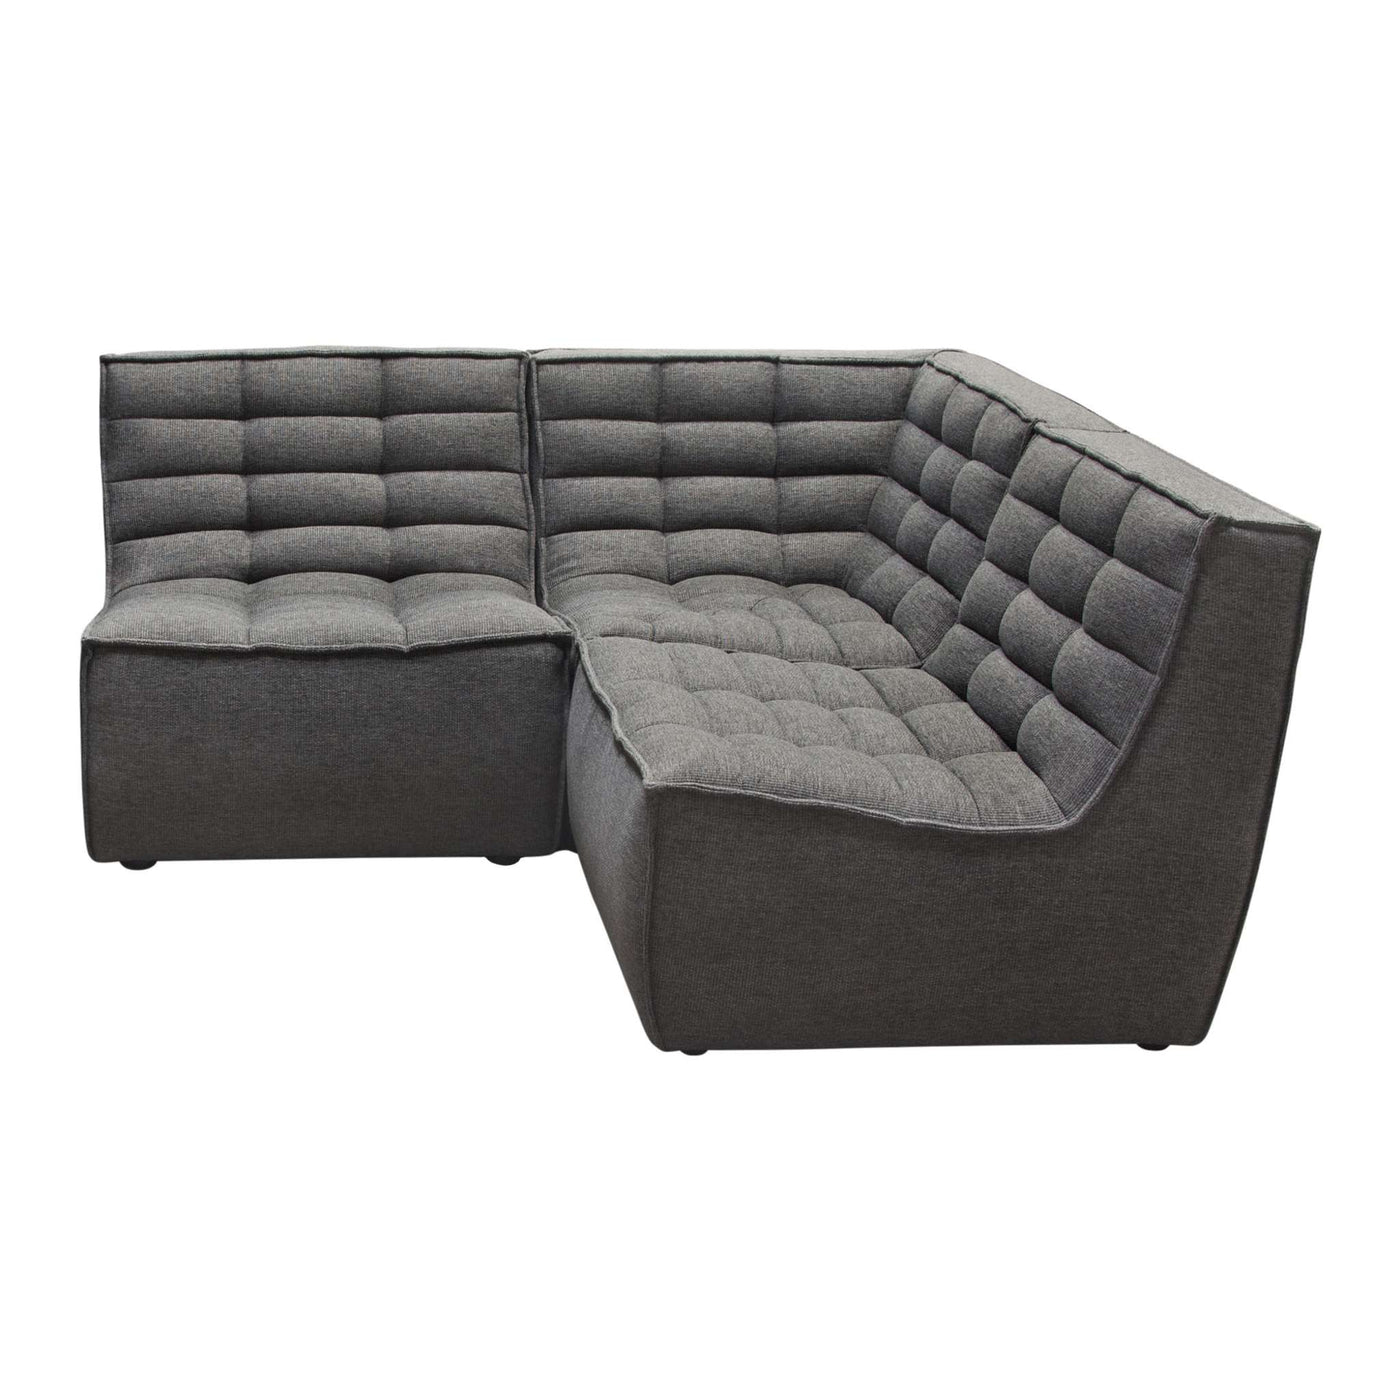 Marshall Scooped Seat Ottoman in Sand Fabric by Diamond Sofa